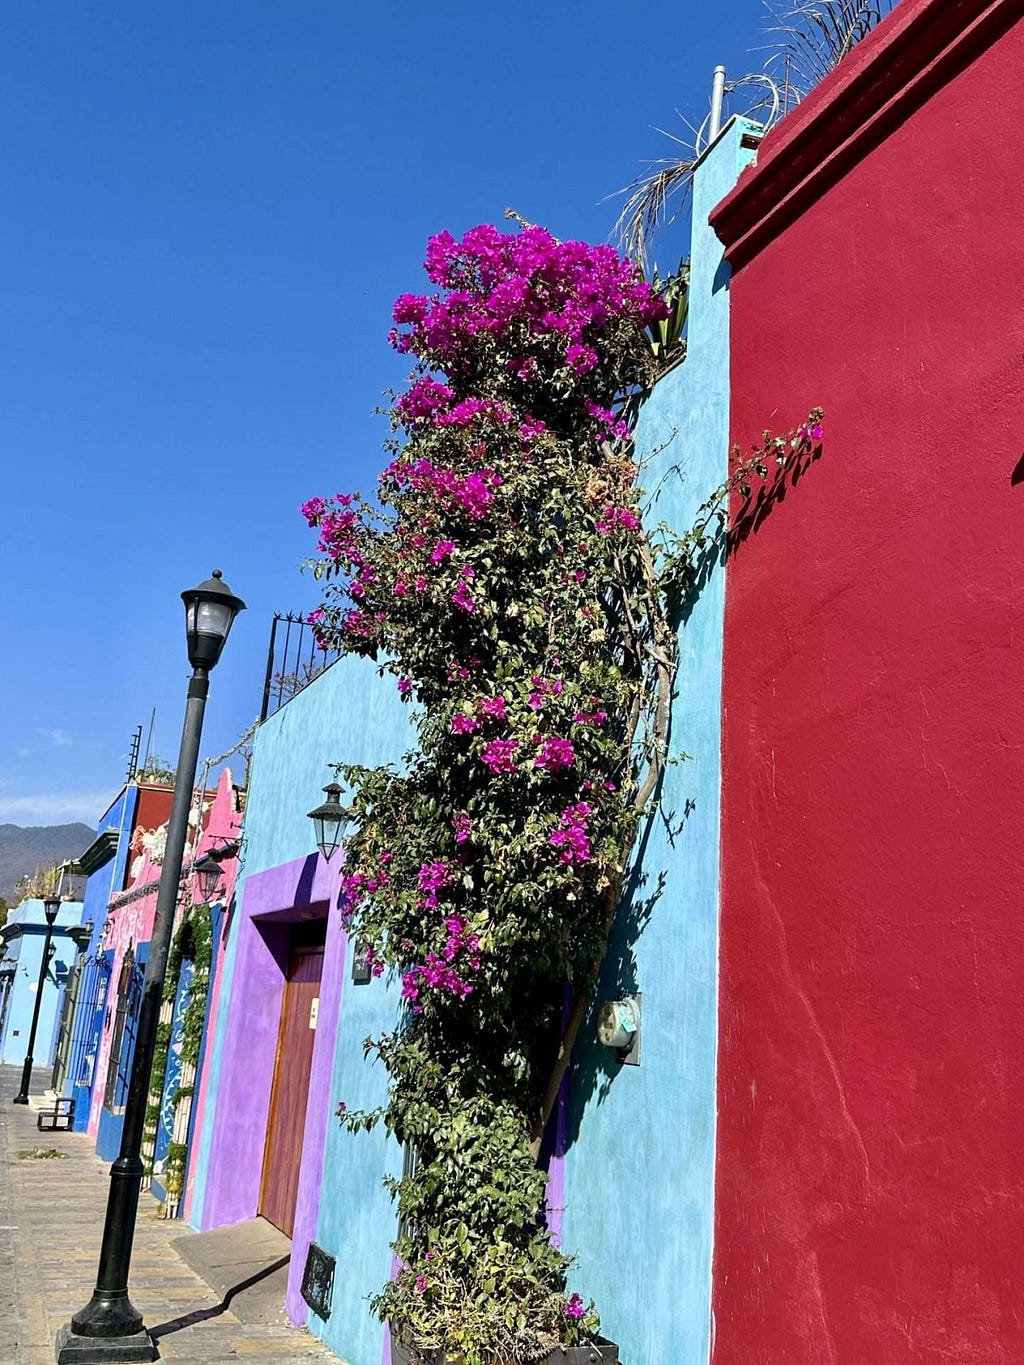 A colorful street in Oaxaca with colorful buildings and flowers